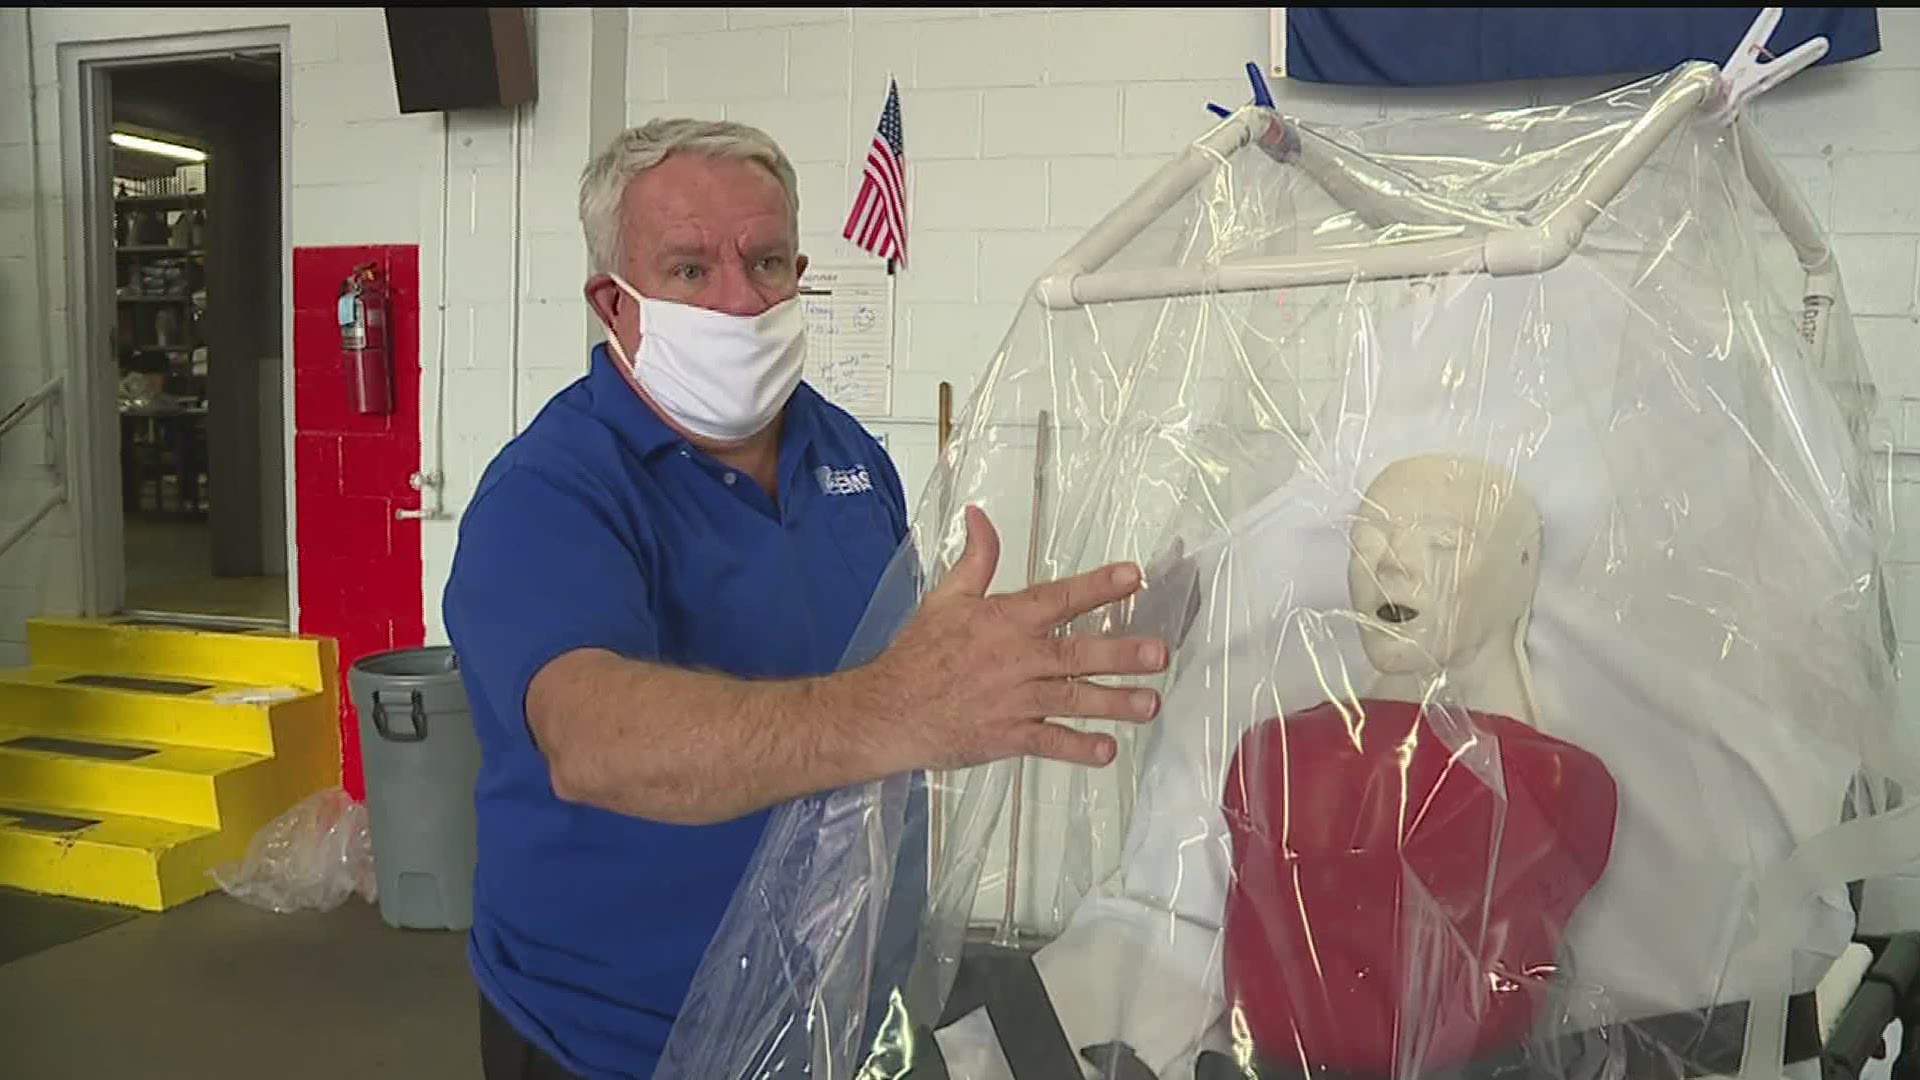 Susquehanna Valley EMS is the first in Lancaster County to use shower curtains to transport possible COVID-19 patients.